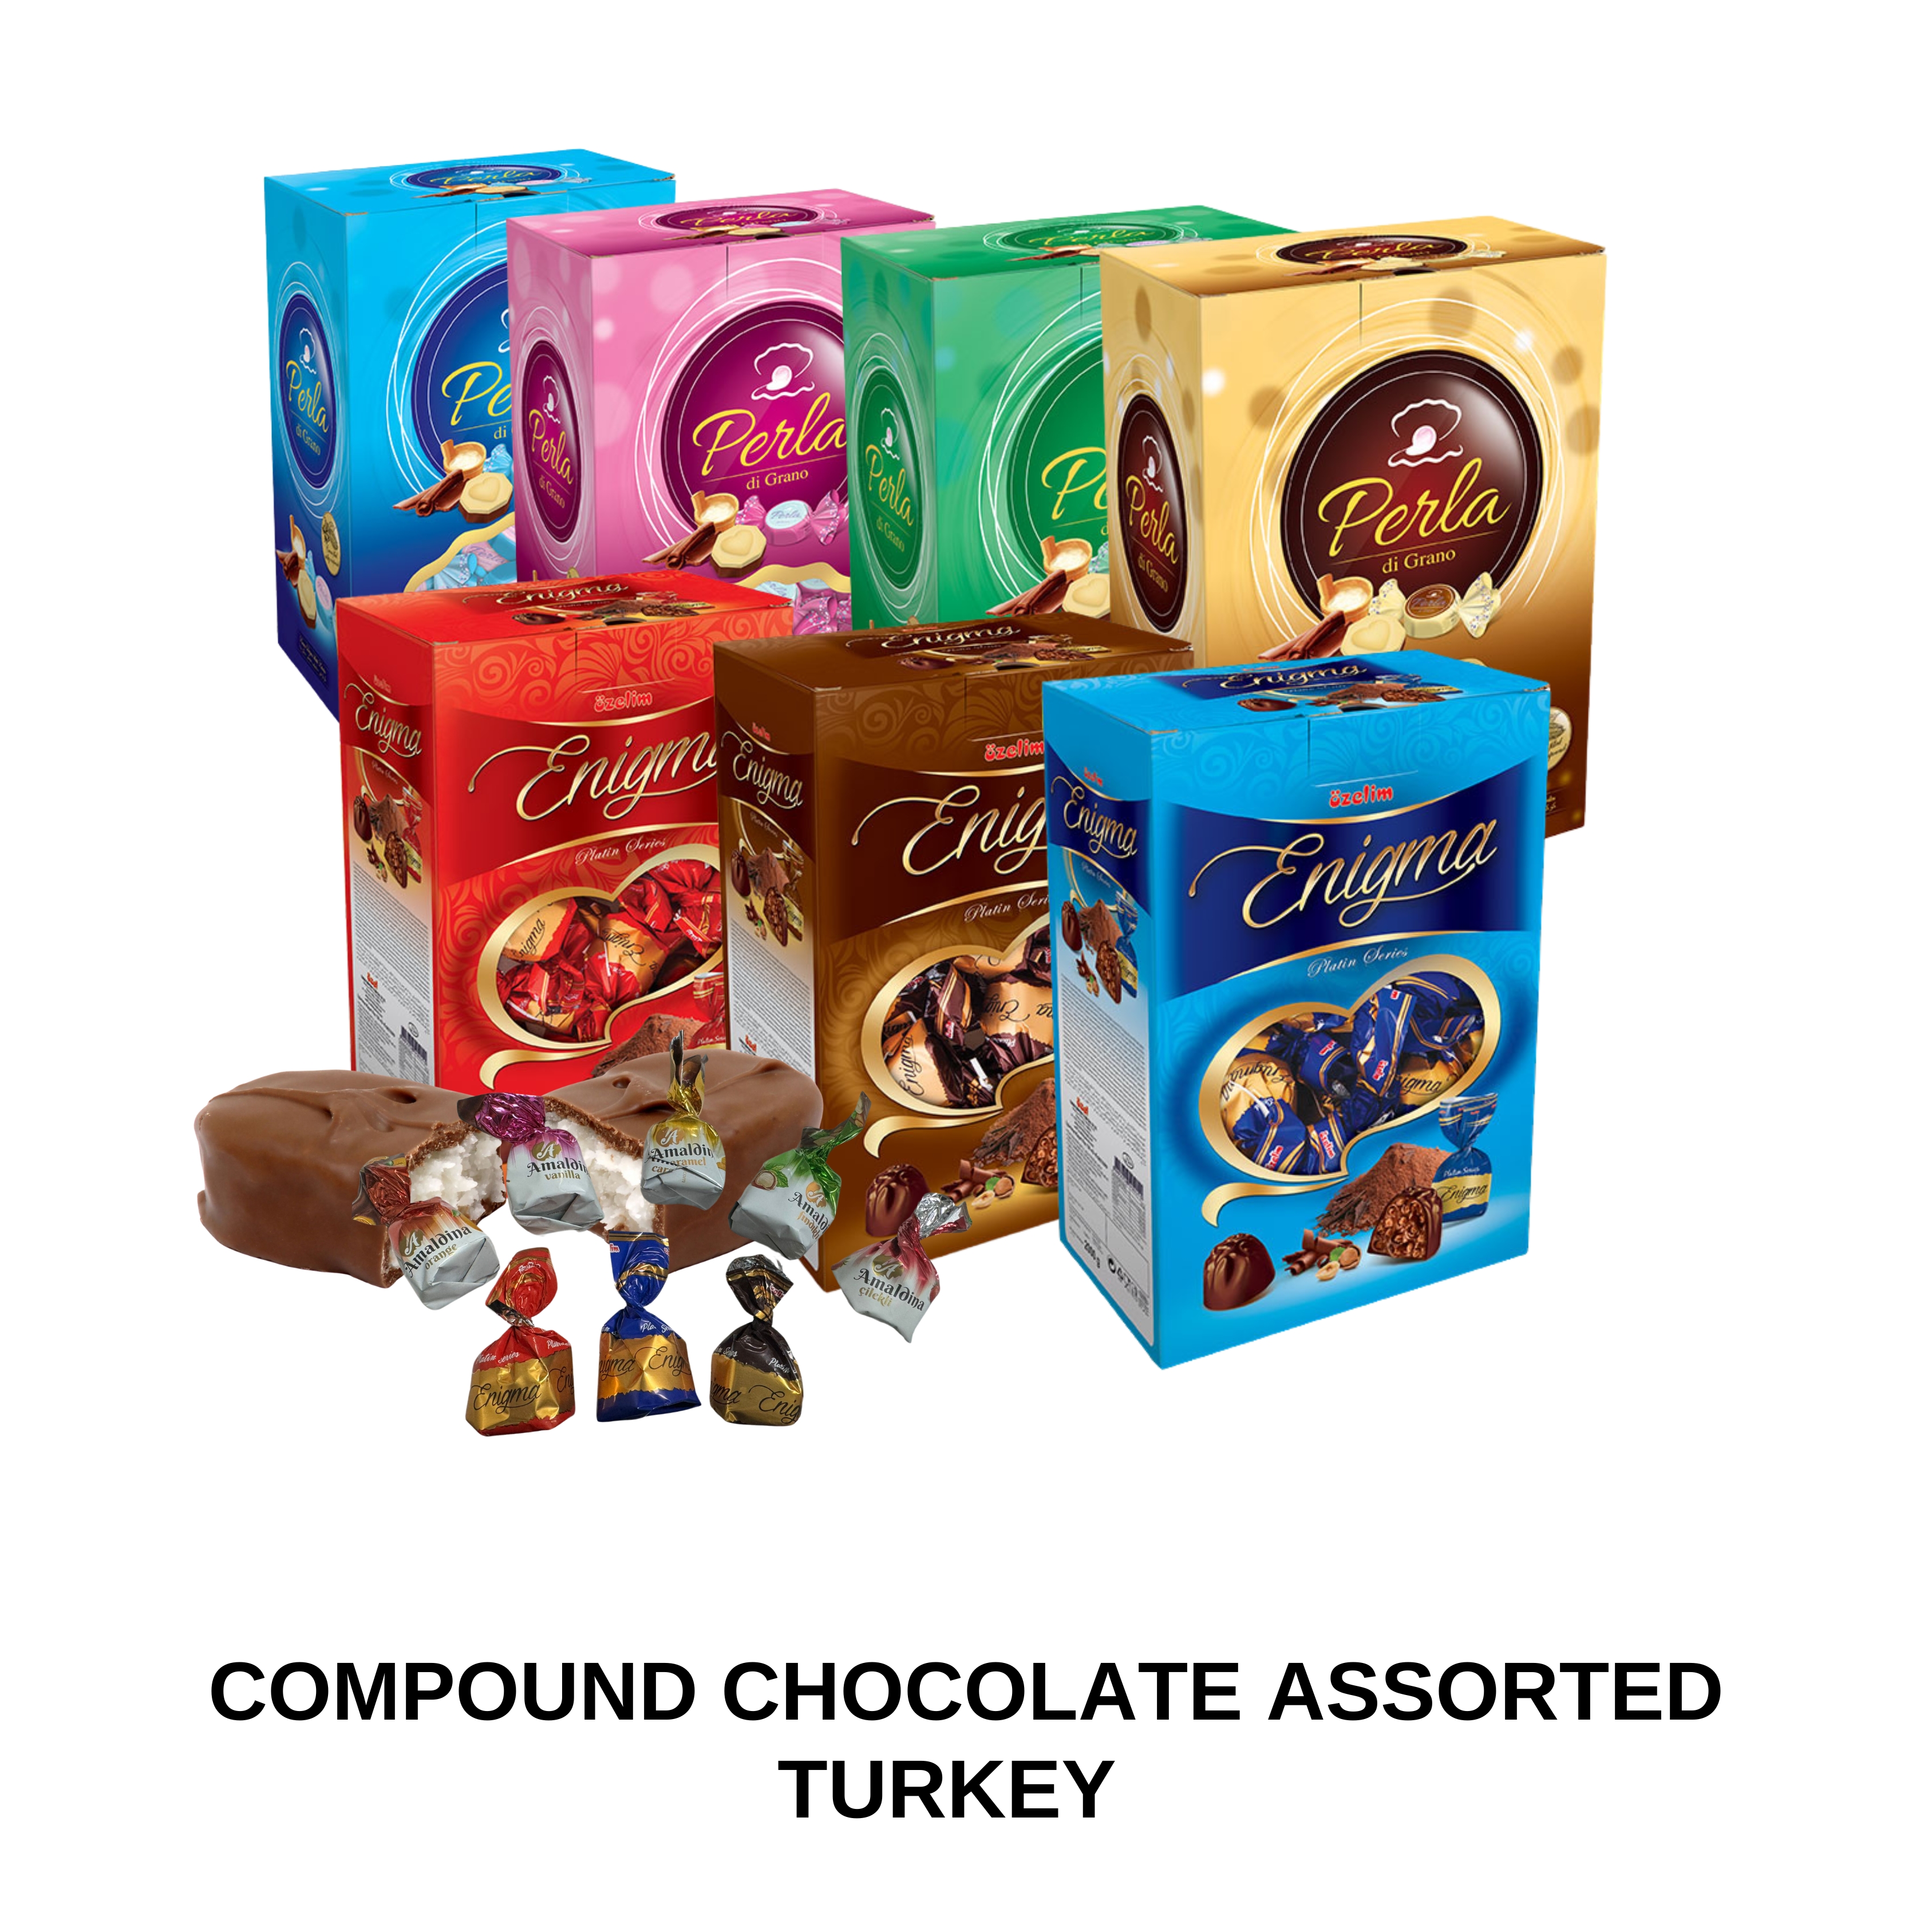 Compound Chocolate Assorted